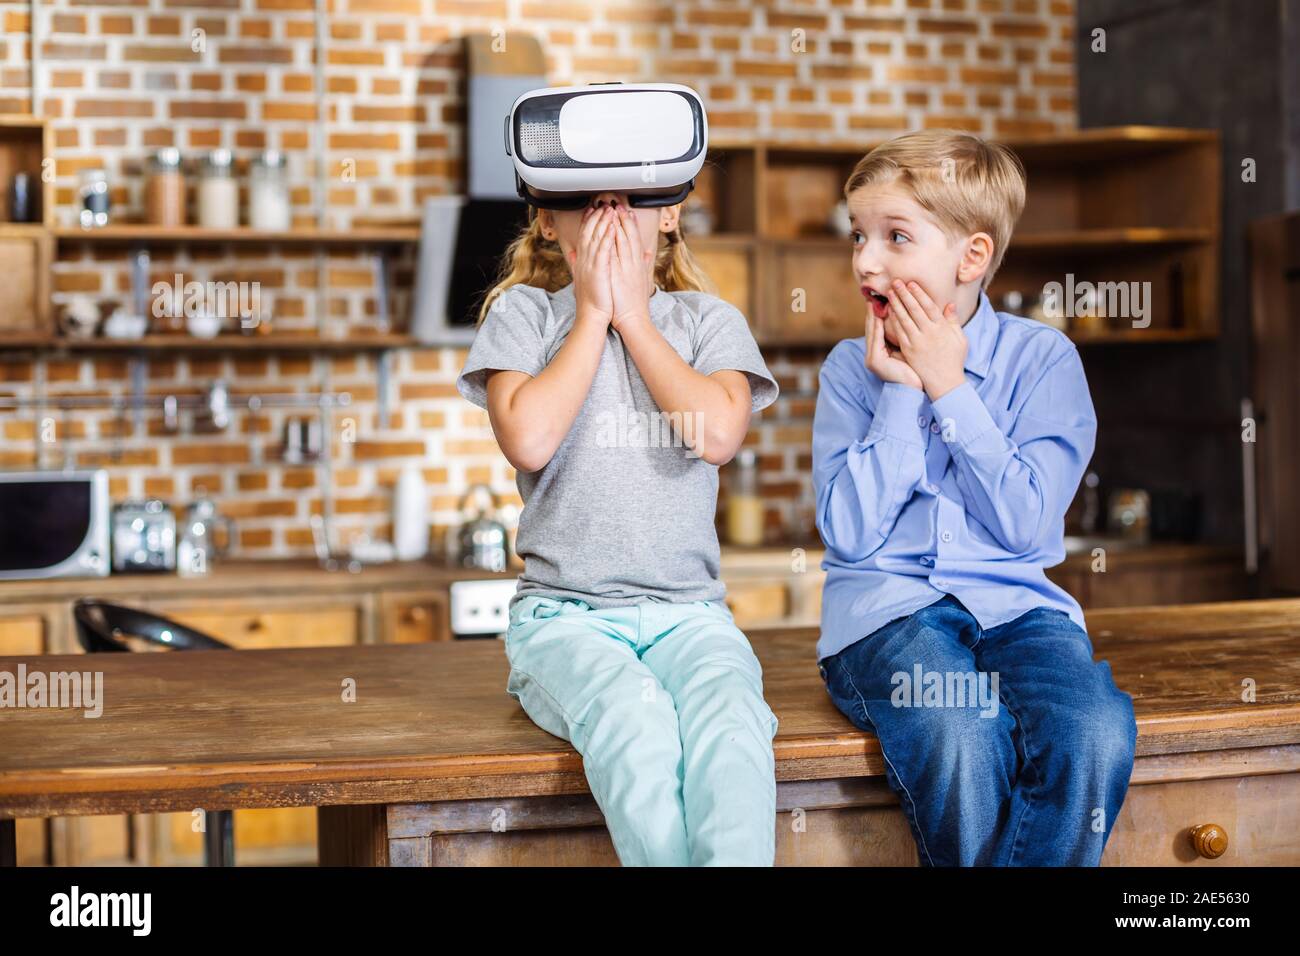 Cheerful siblings testing VR device Stock Photo